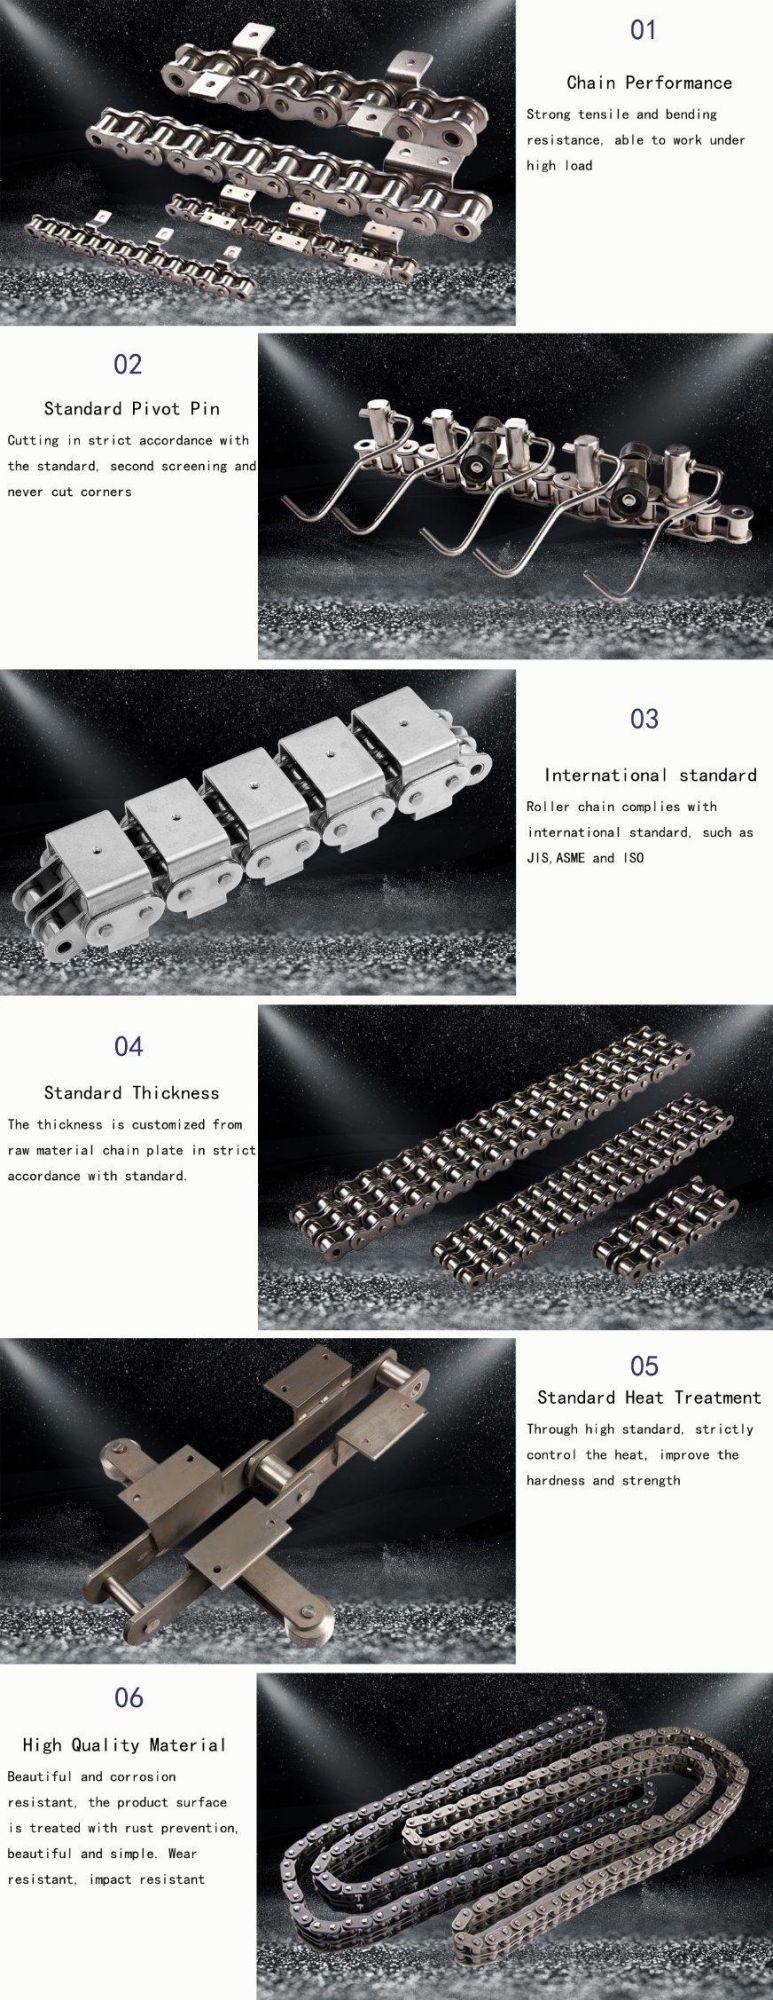 Factory Price Stainless Steel Double Pitch Conveyor Roller Chain C2080 C2080h with Attachments A1 & A2 & K1 & K2